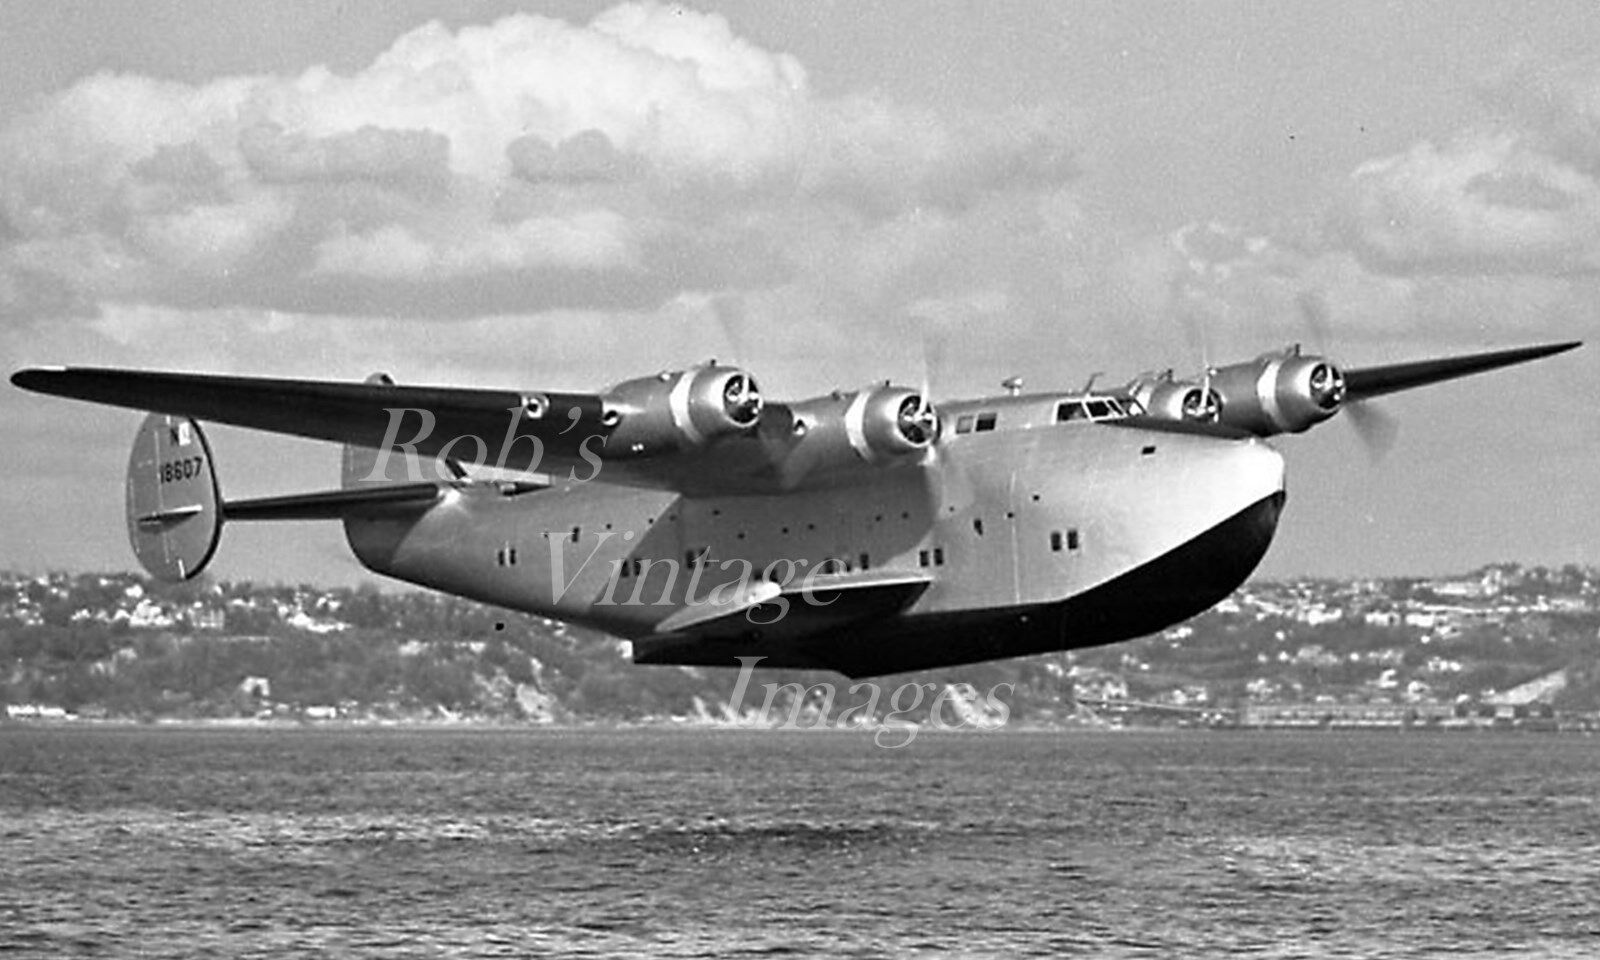  Pan Am Clipper  Boeing 314 18607 Photo Airplane Flying Boat 1941 S0ld to BOAC